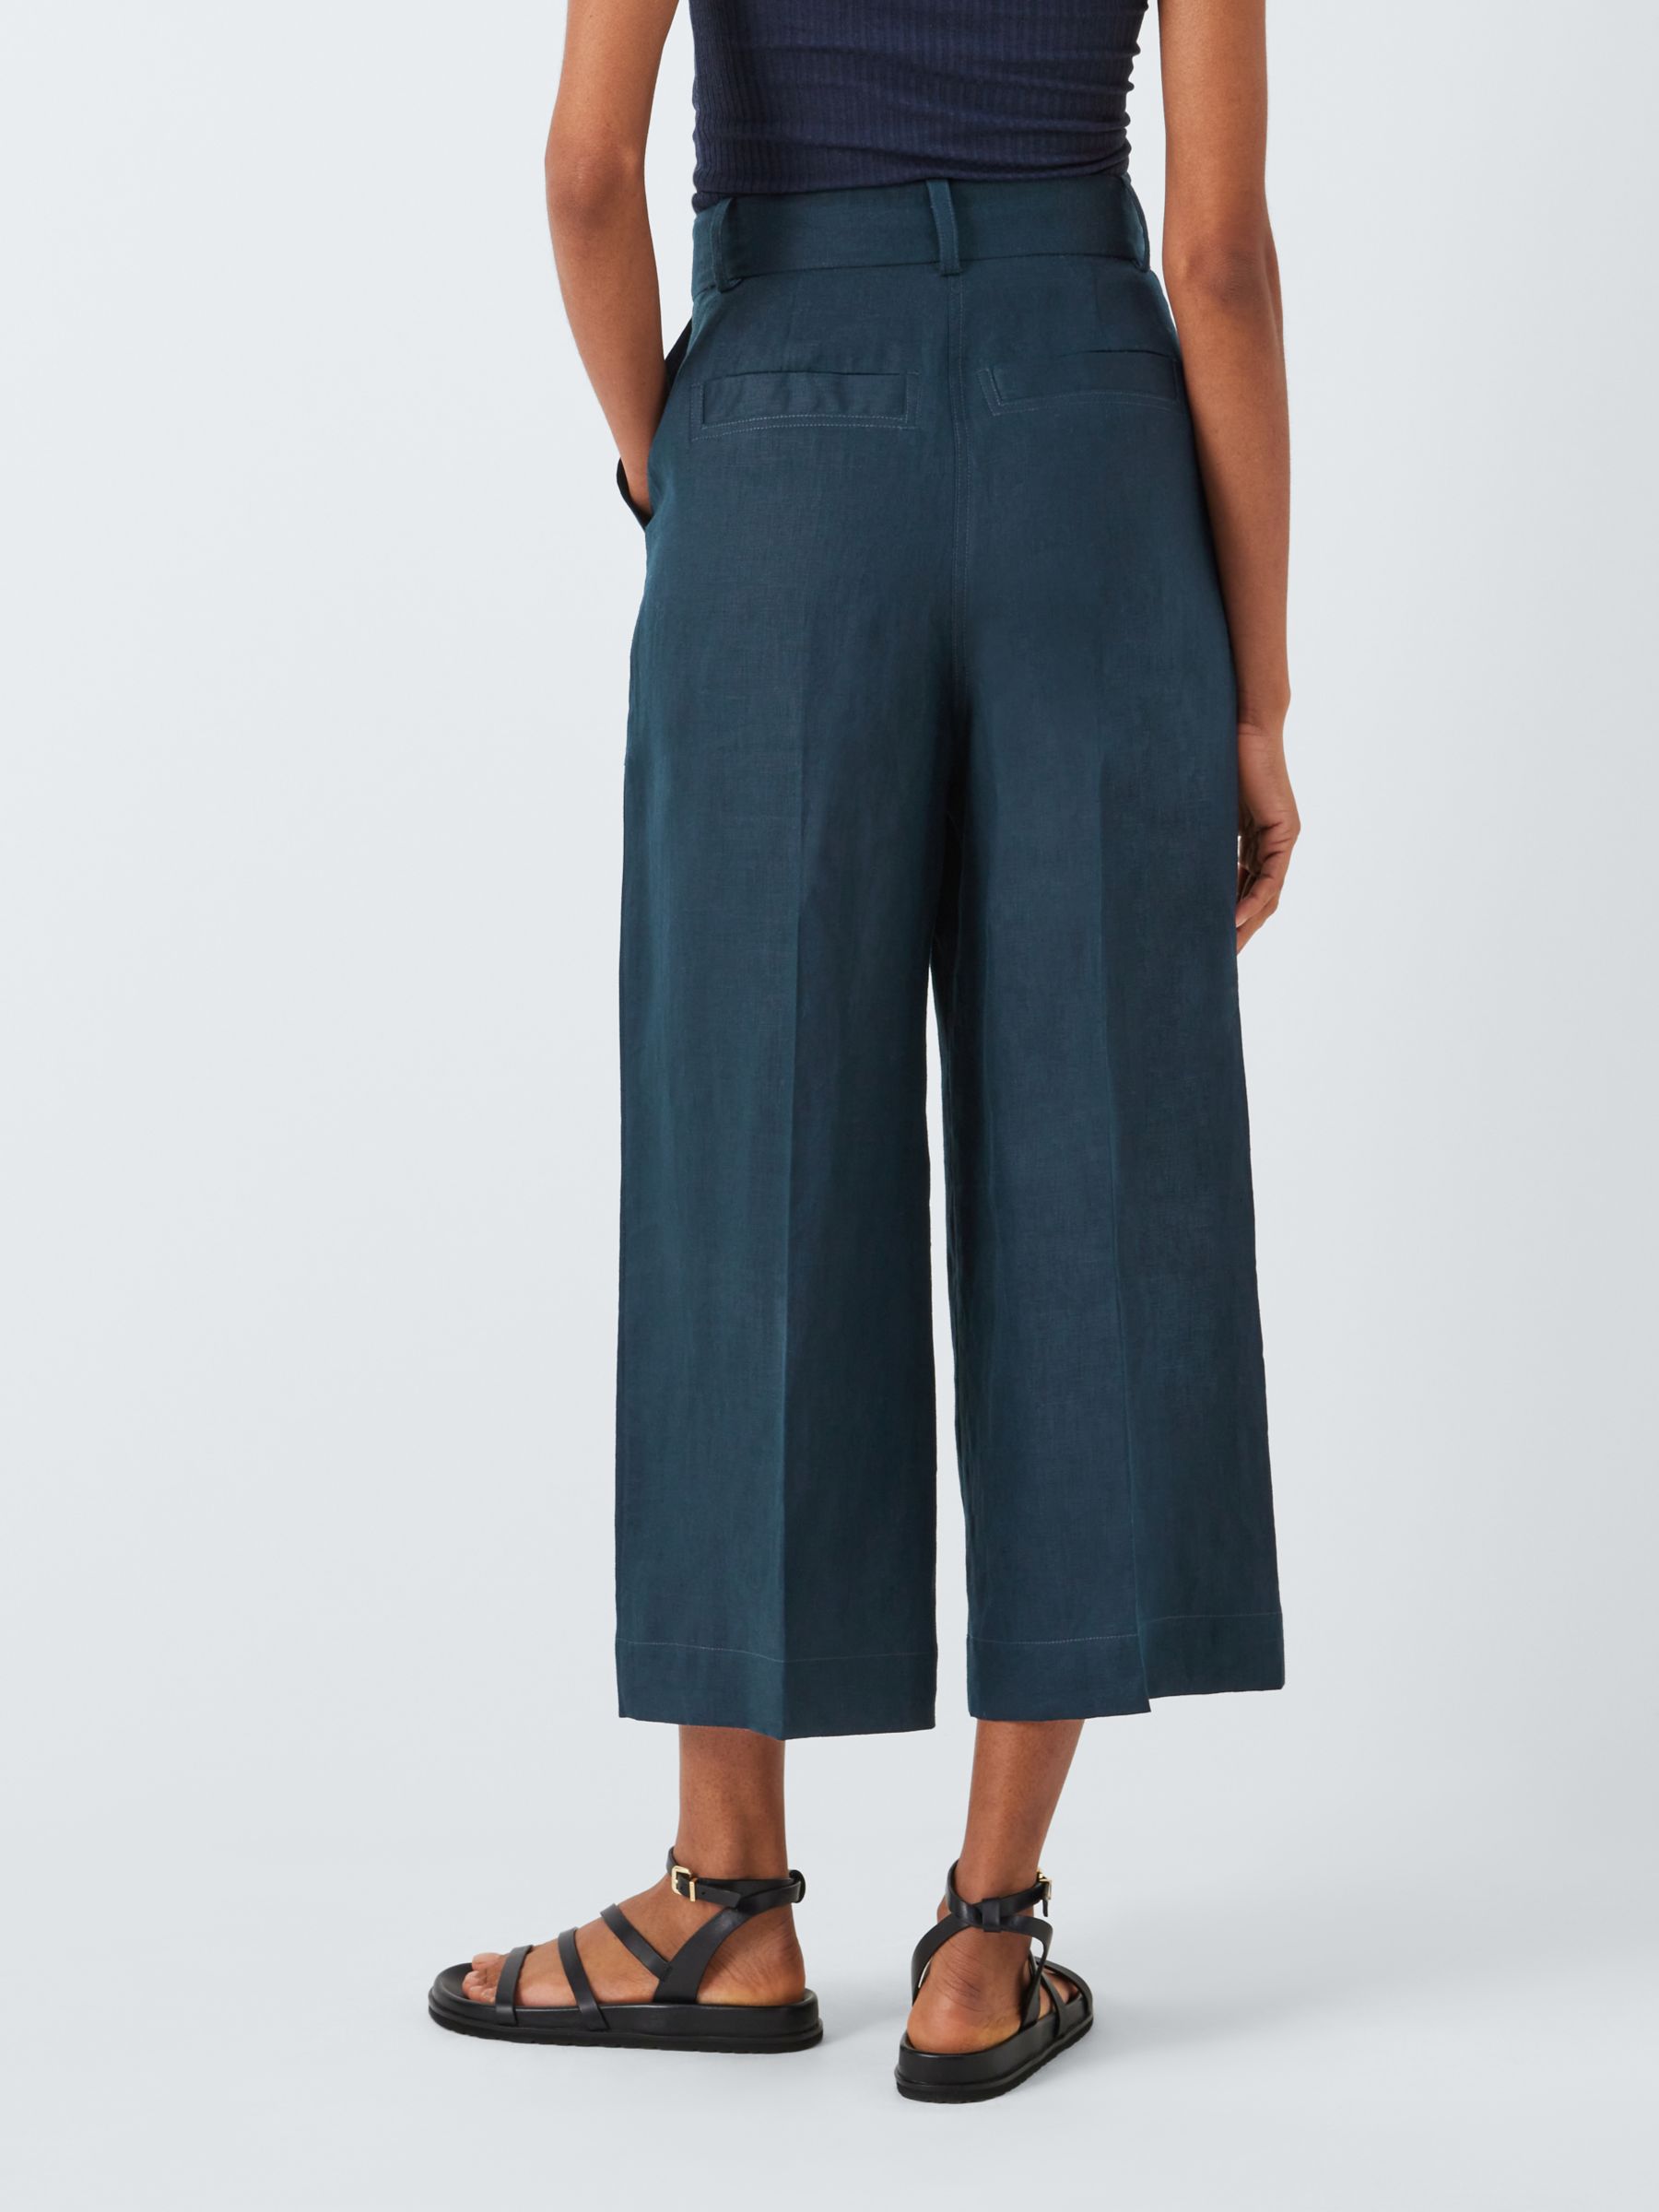 John Lewis Cropped Linen Trousers, Navy, 8